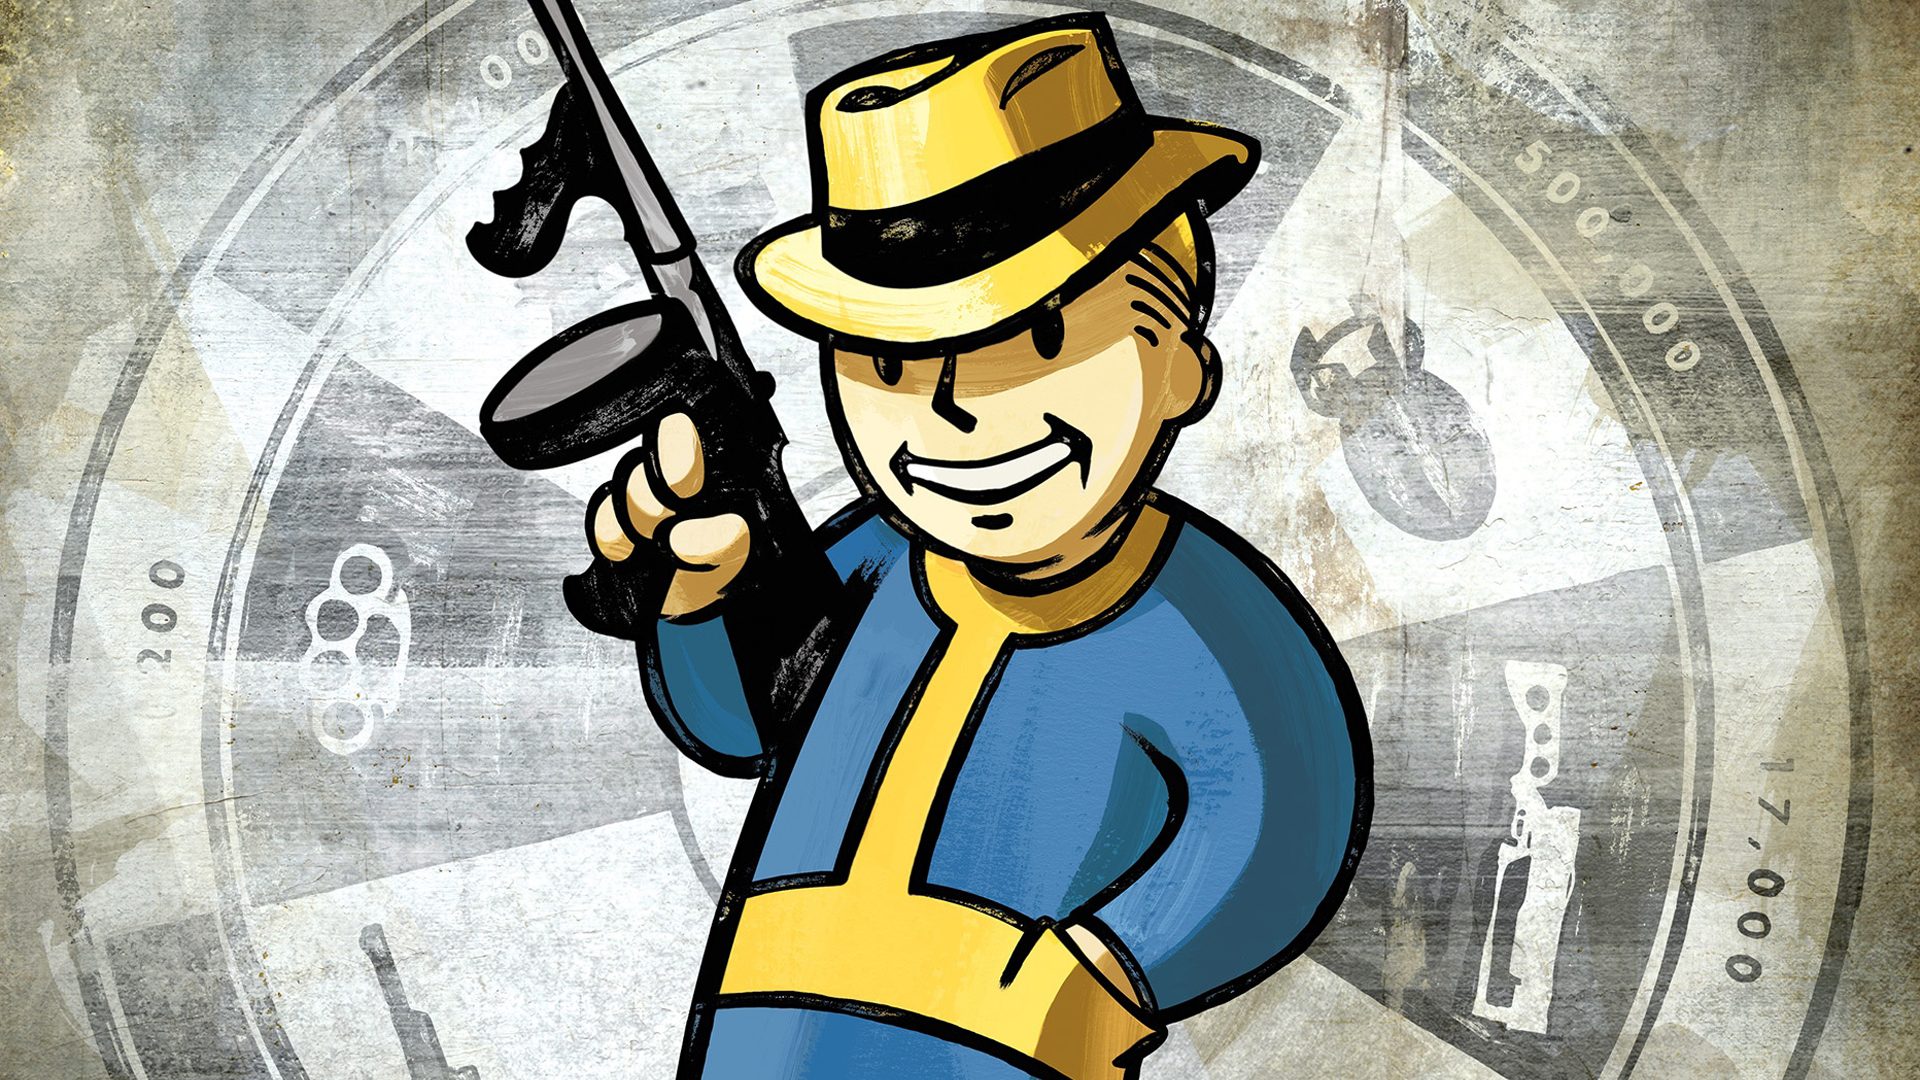 Future Obsidian-made Fallout Games 'Very Doubtful'